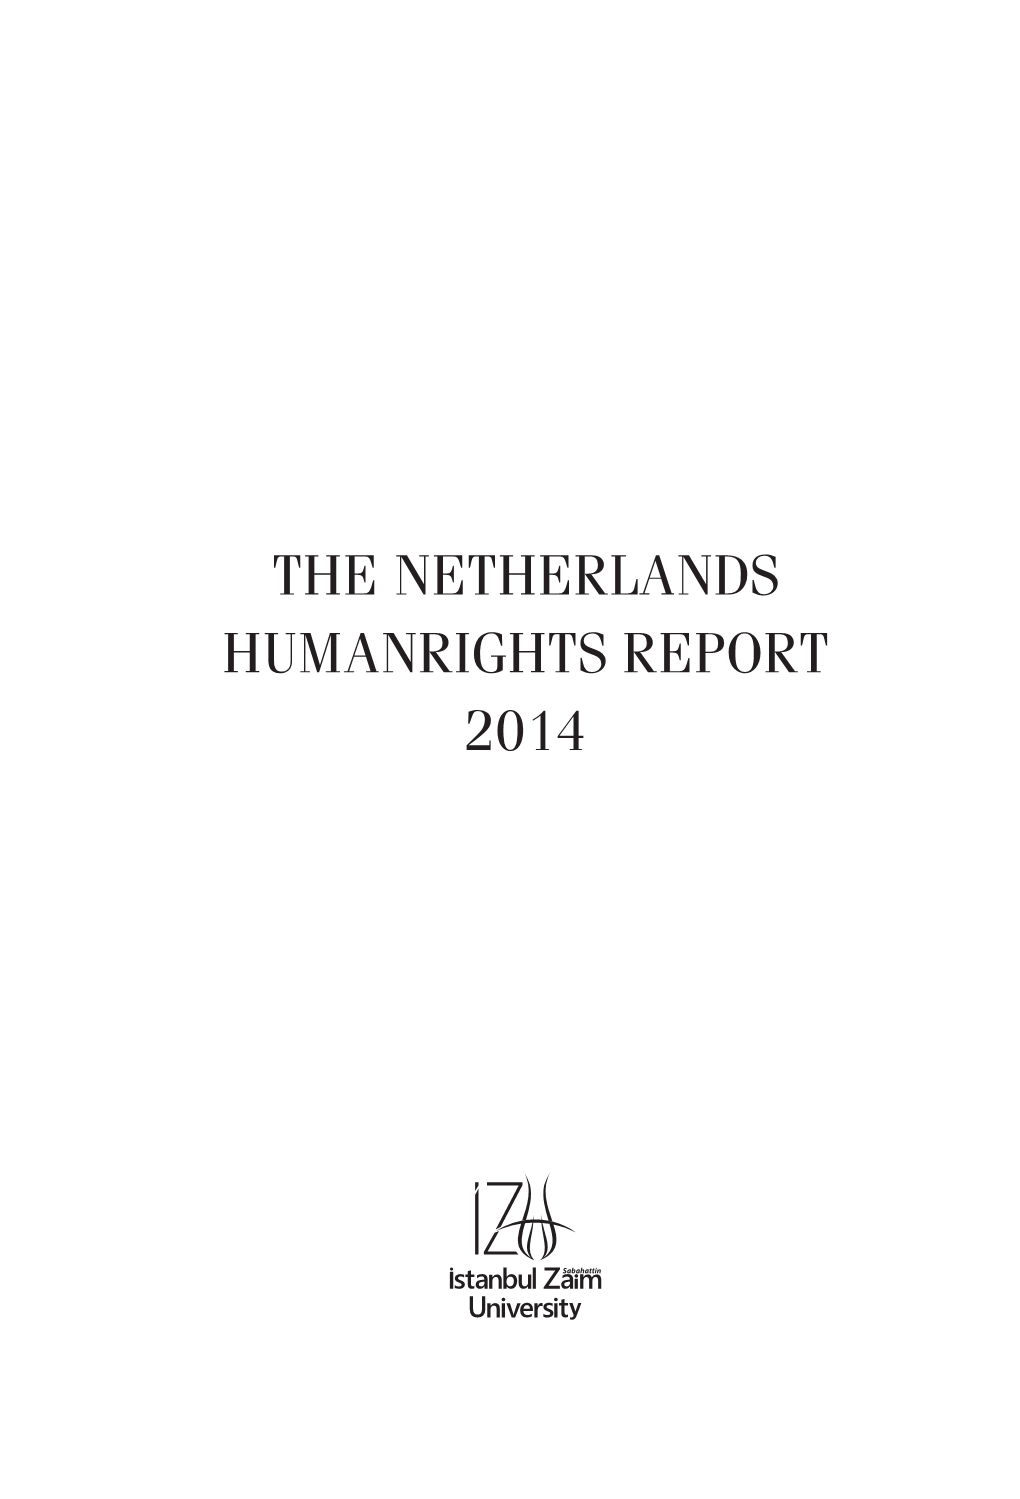 The Netherlands Humanrights Report 2014